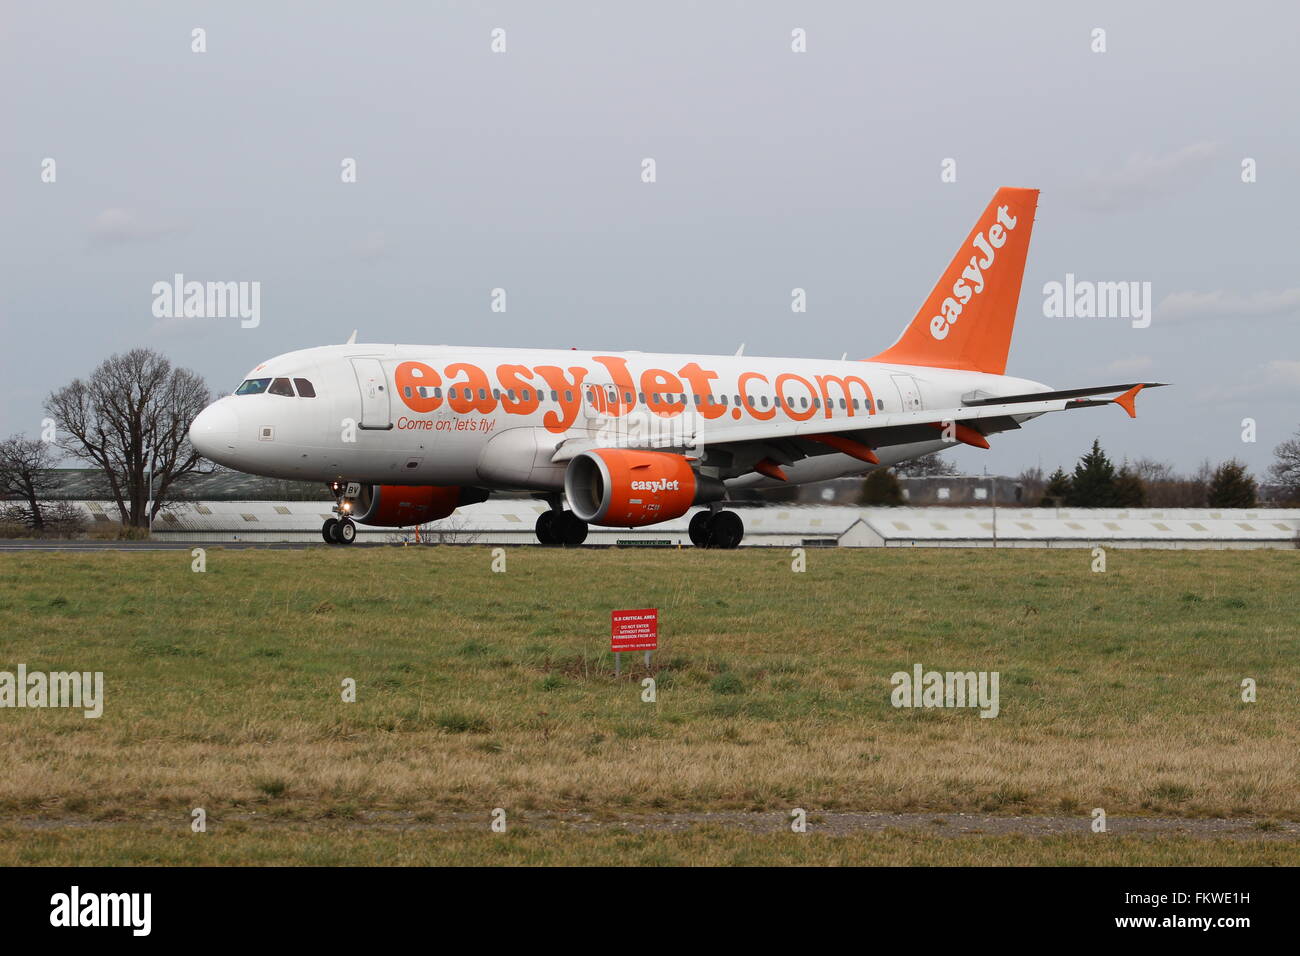 easyjet at london southend airport Stock Photo